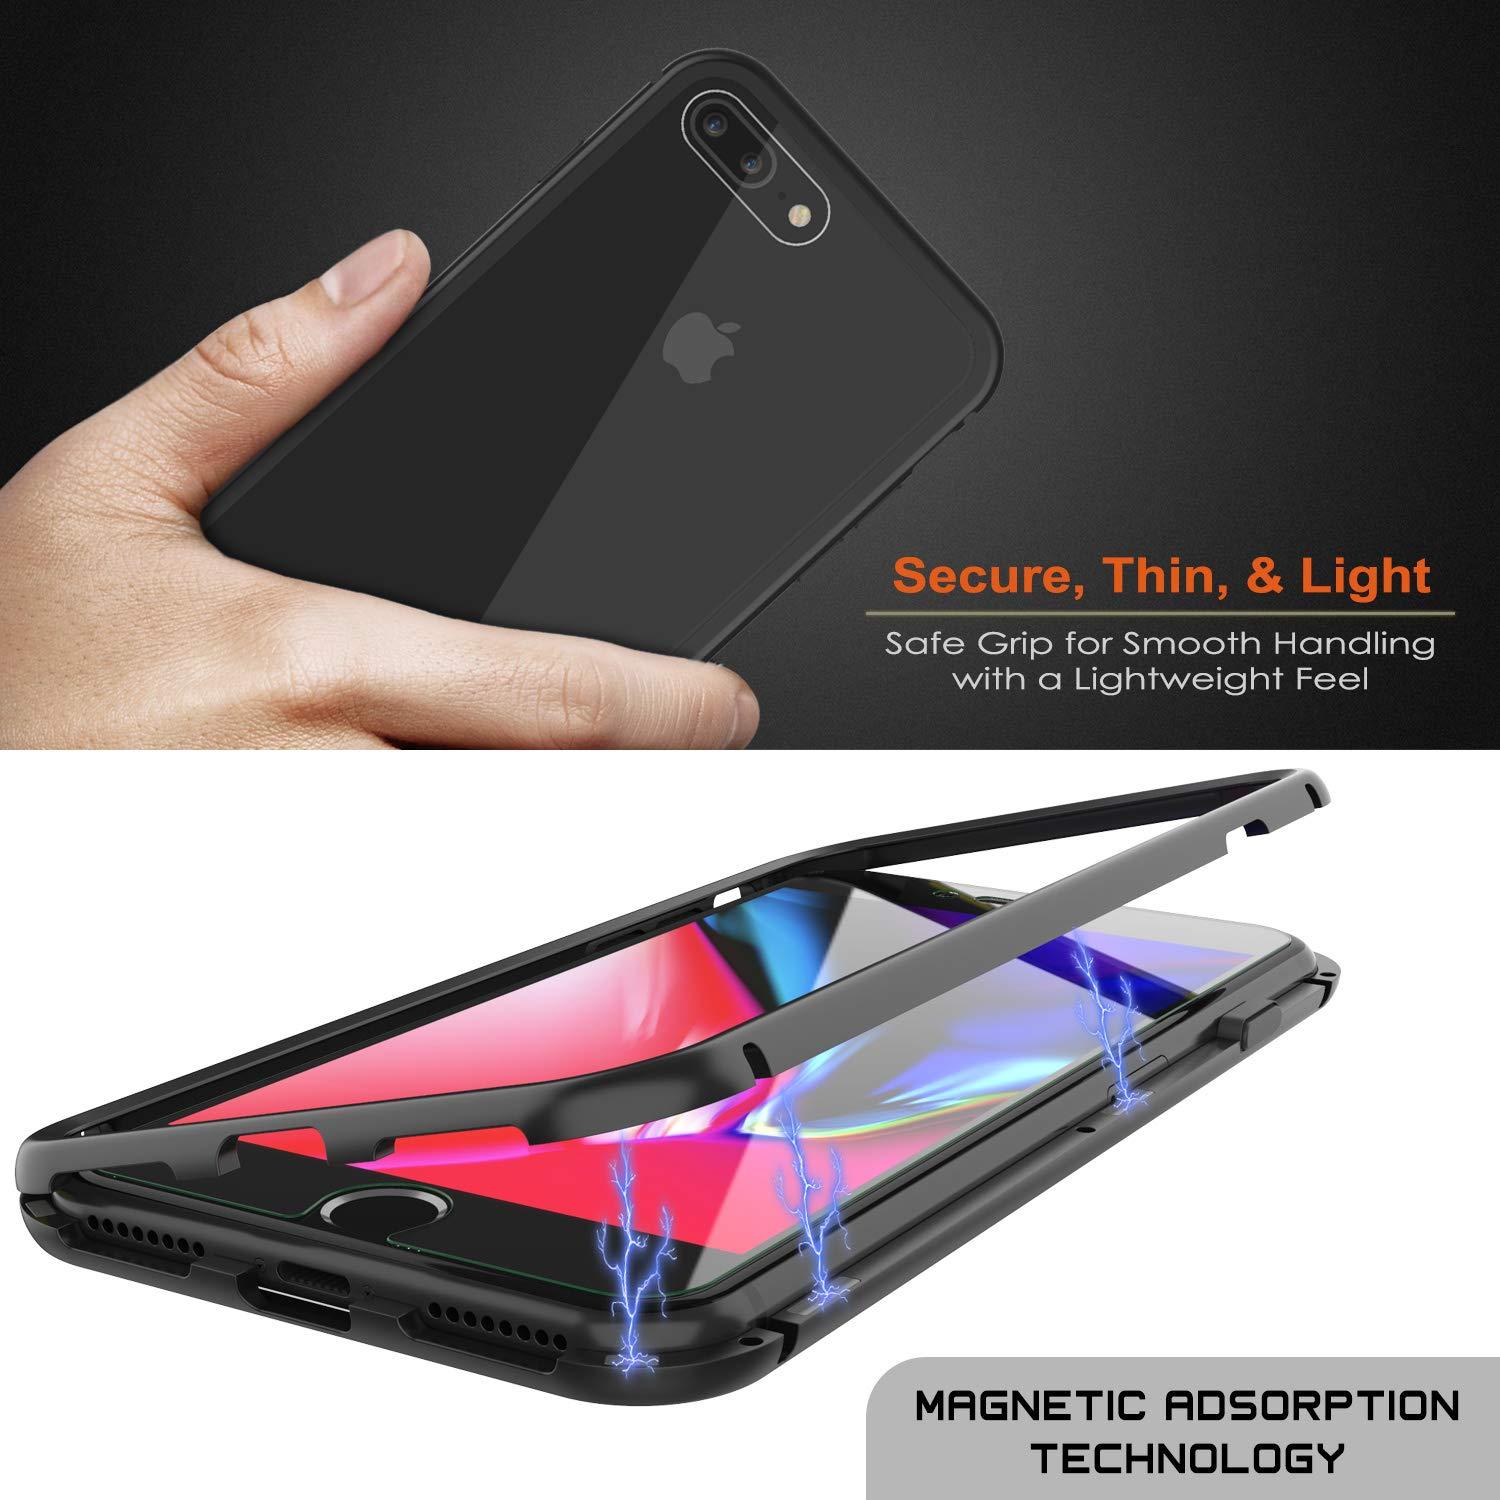 iPhone 8+ Plus Case, Punkcase Magnetix 2.0 Protective TPU Cover W/ Tempered Glass Screen Protector [Black]